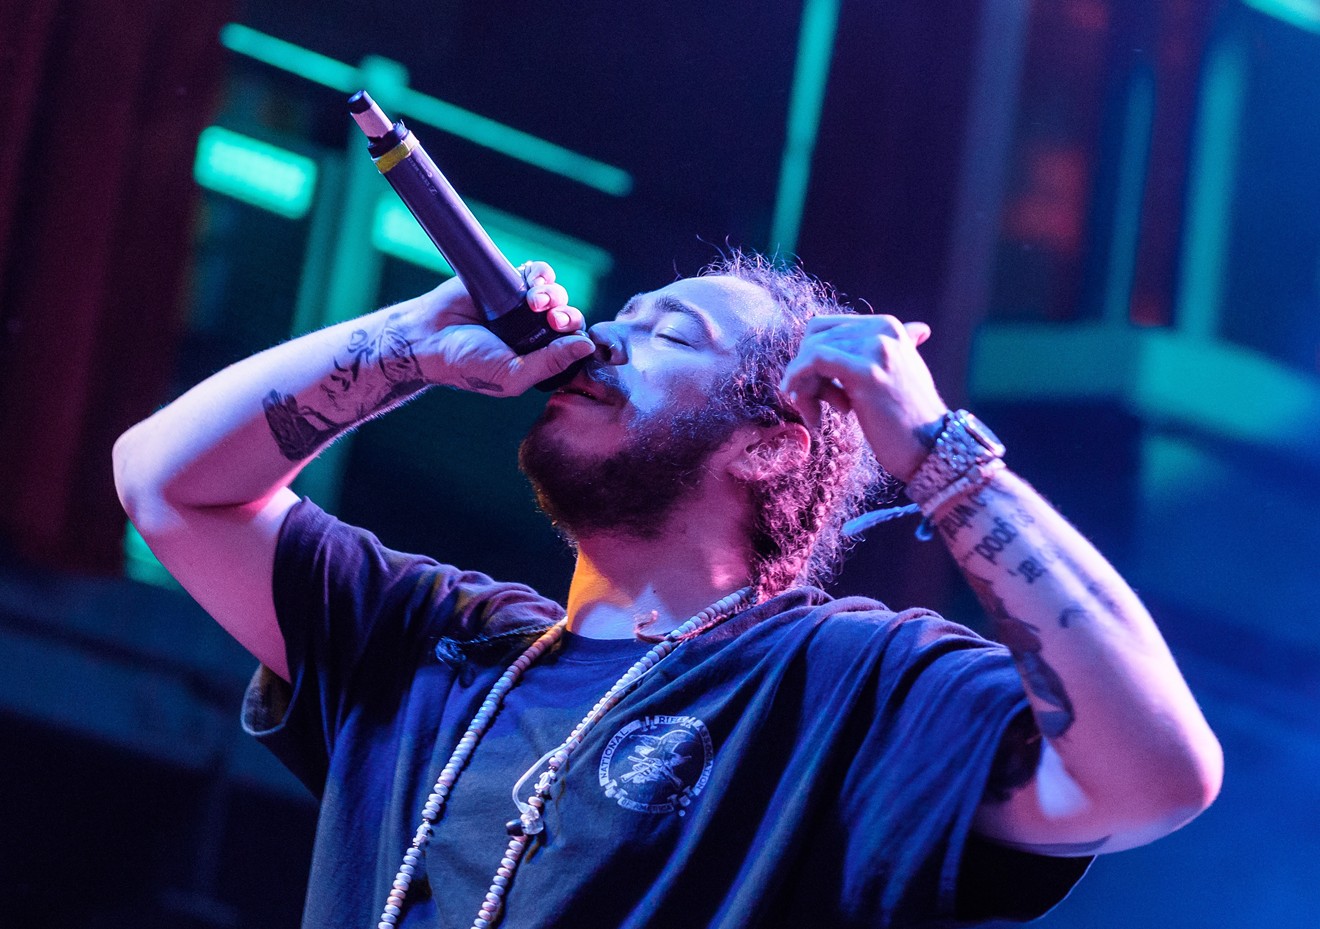 Post Malone is scheduled to perform on Friday, November 8, at Gila River Arena in Glendale.